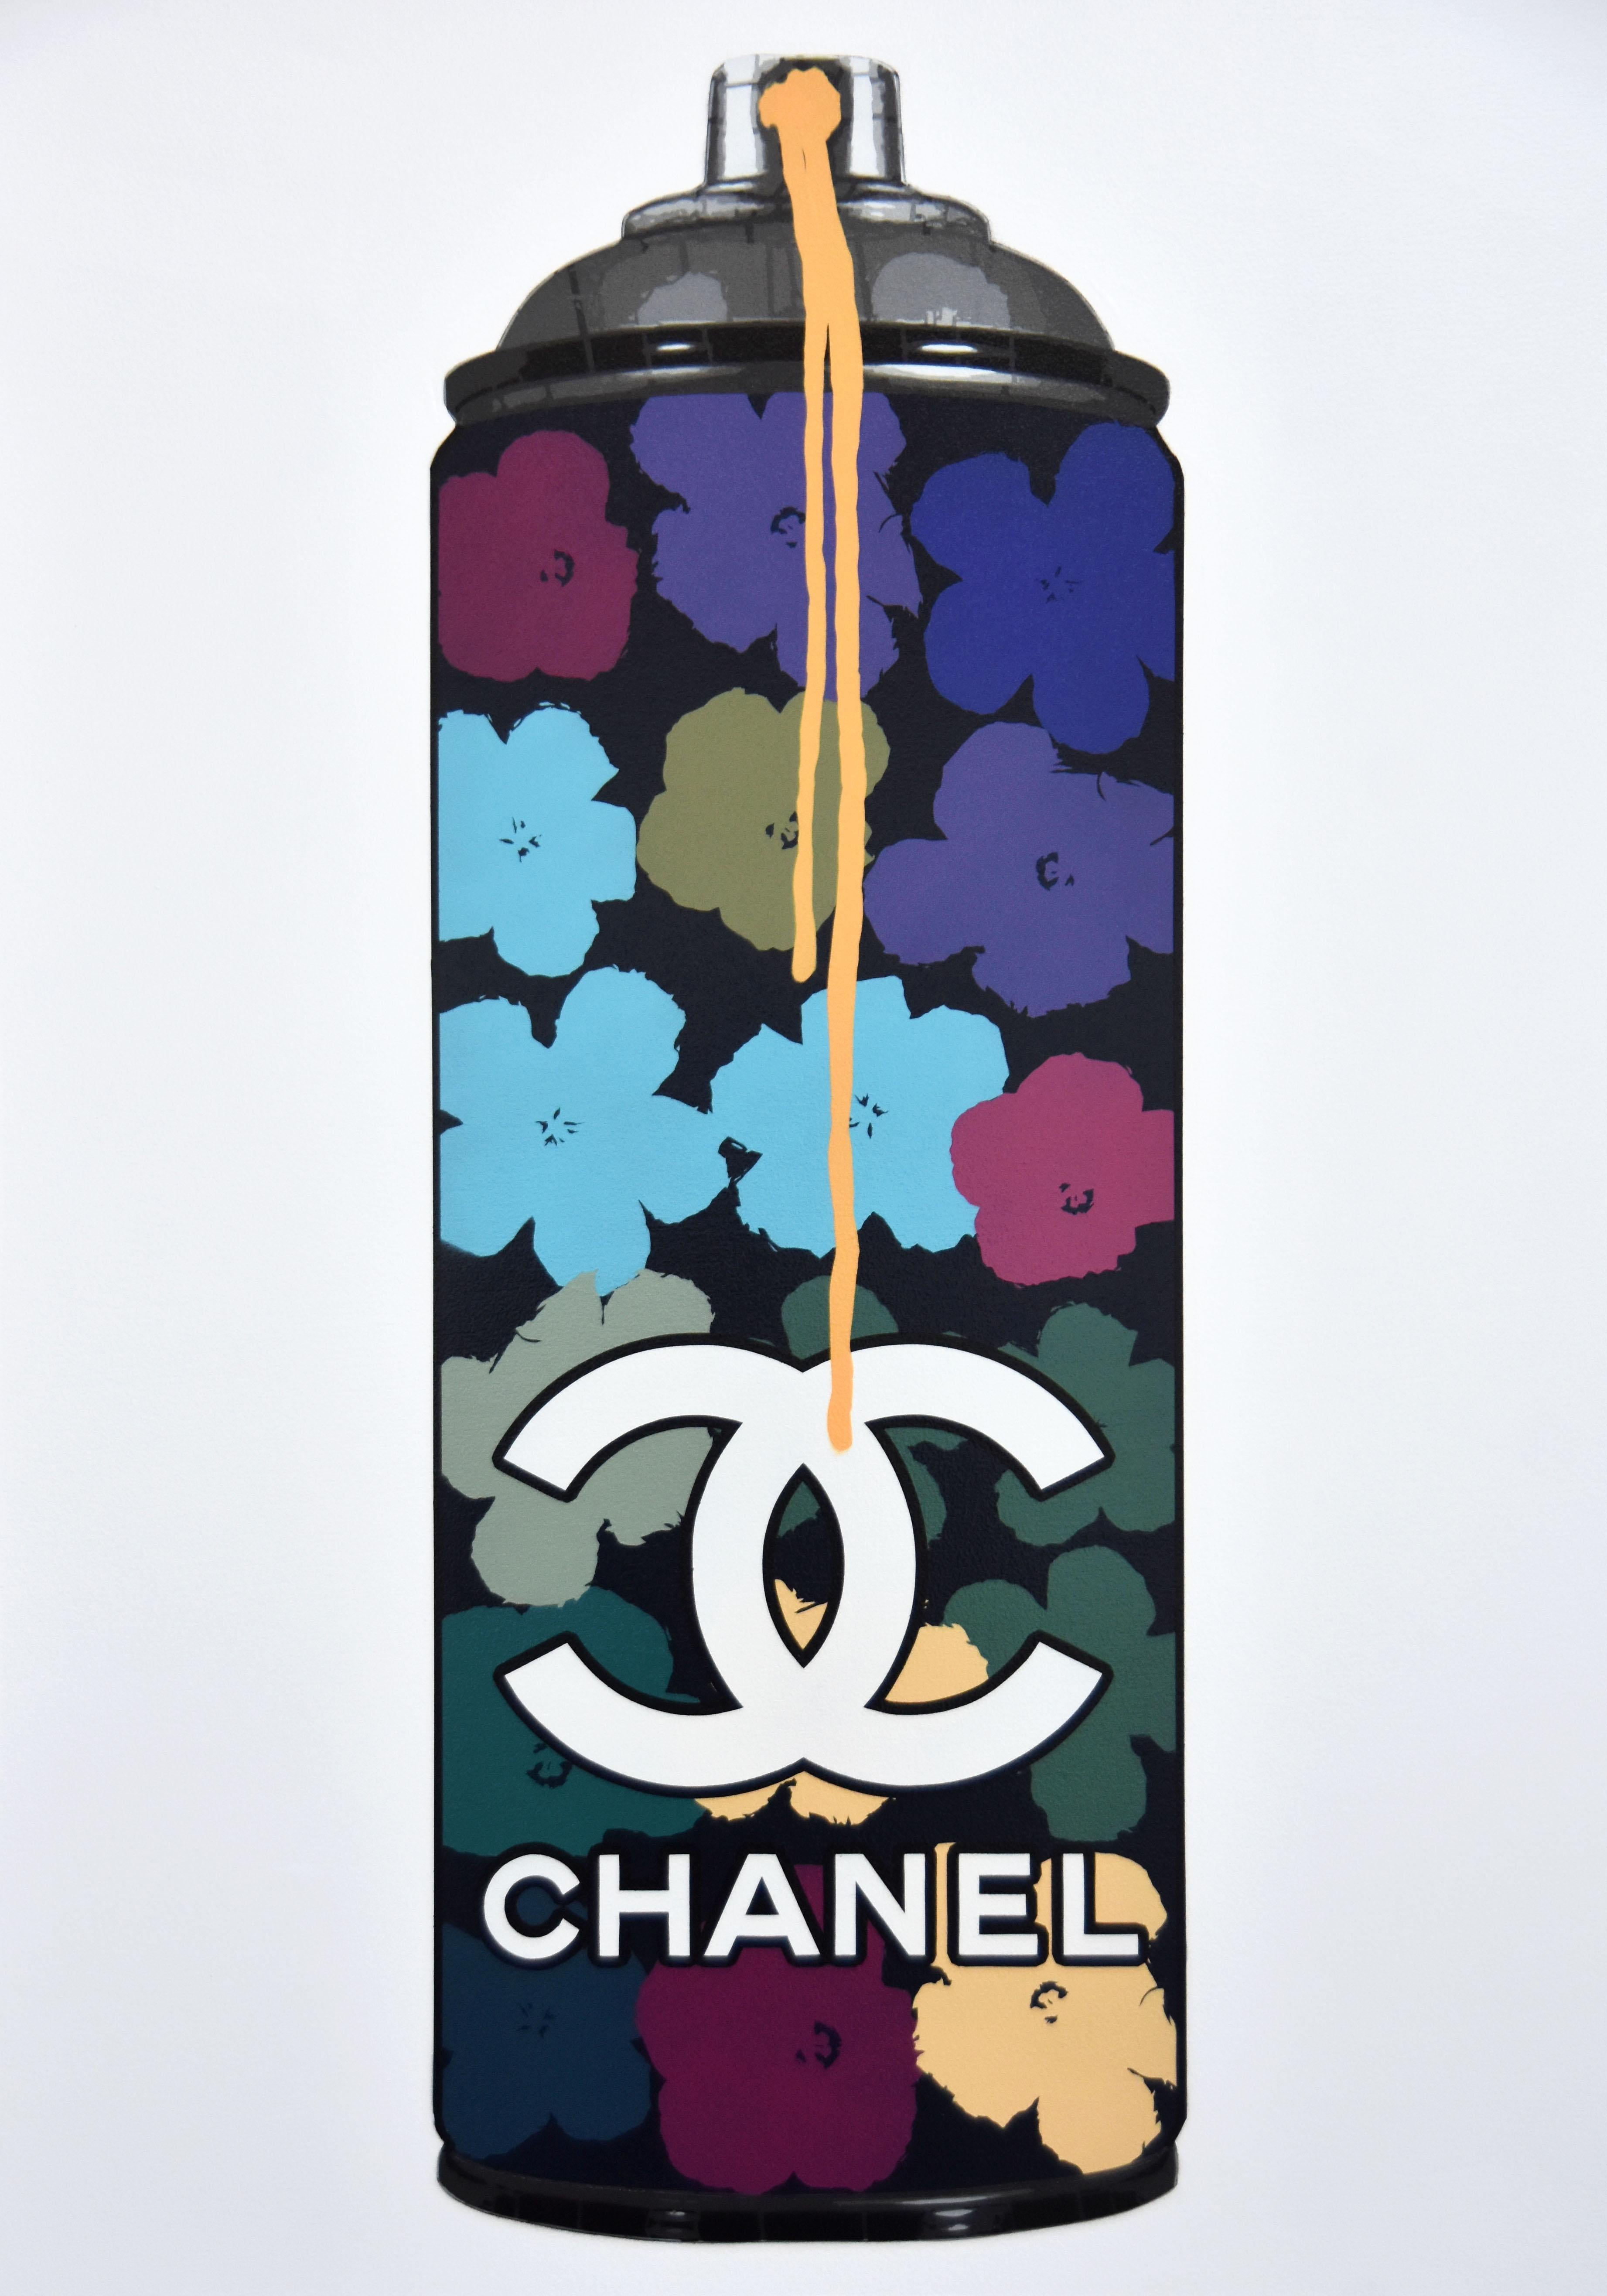 Chanel Flowers (Time) - Painting by Campbell la Pun